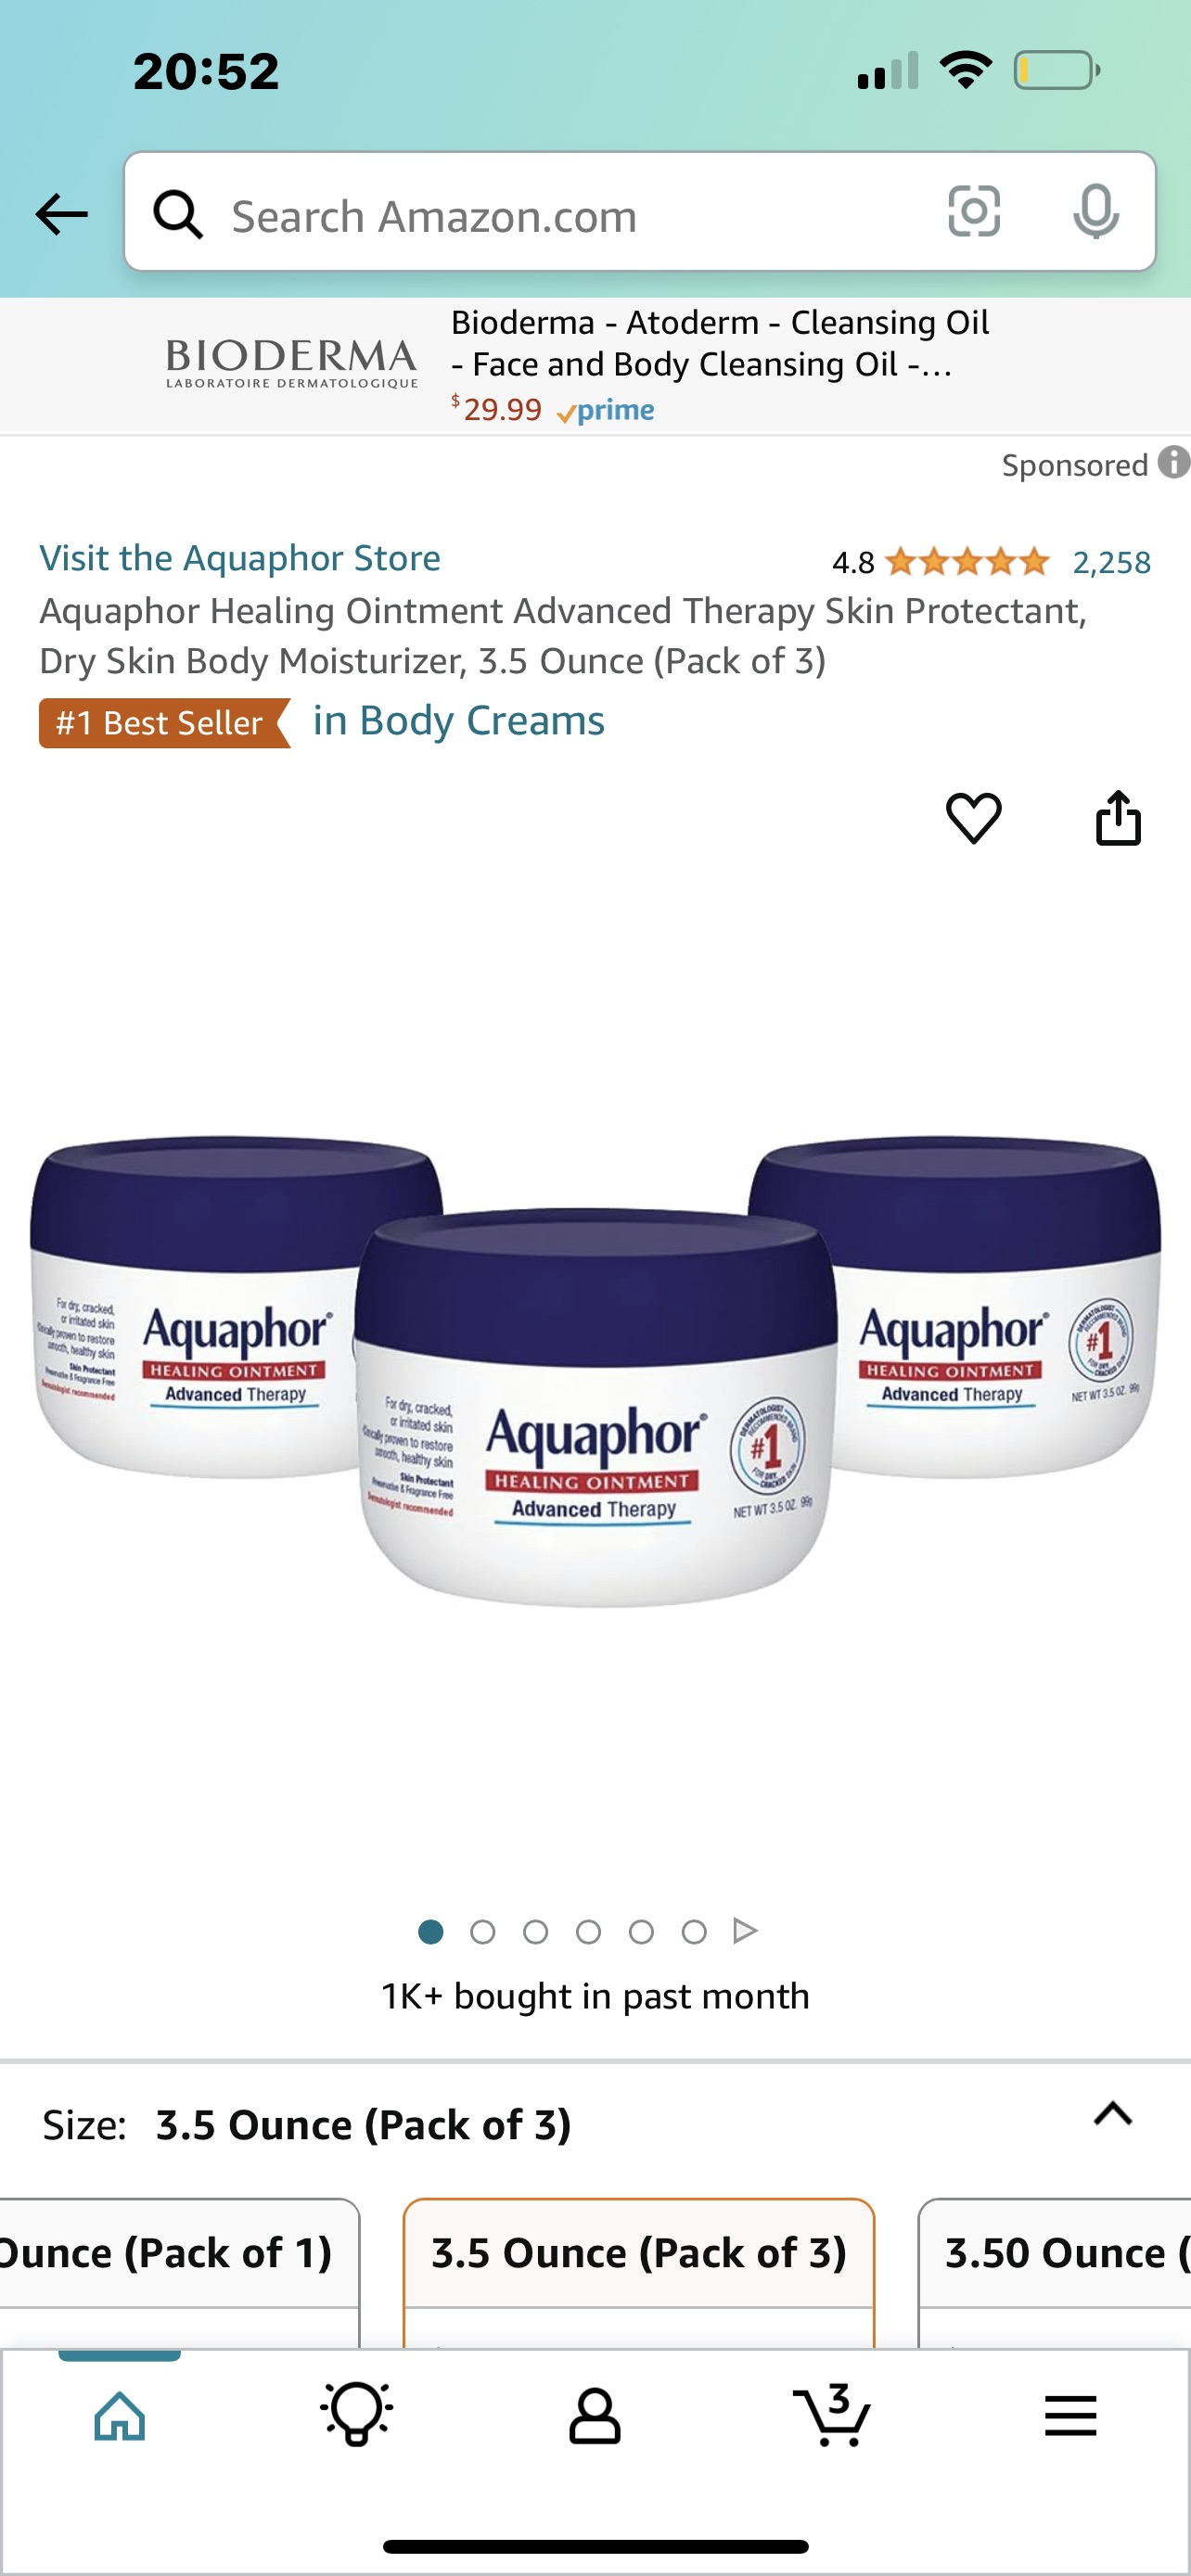 Amazon.com : Aquaphor Healing Ointment Advanced Therapy Skin Protectant, Dry Skin Body Moisturizer, 3.5 Ounce (Pack of 3) : Therapeutic Skin Care Products : Health & Household